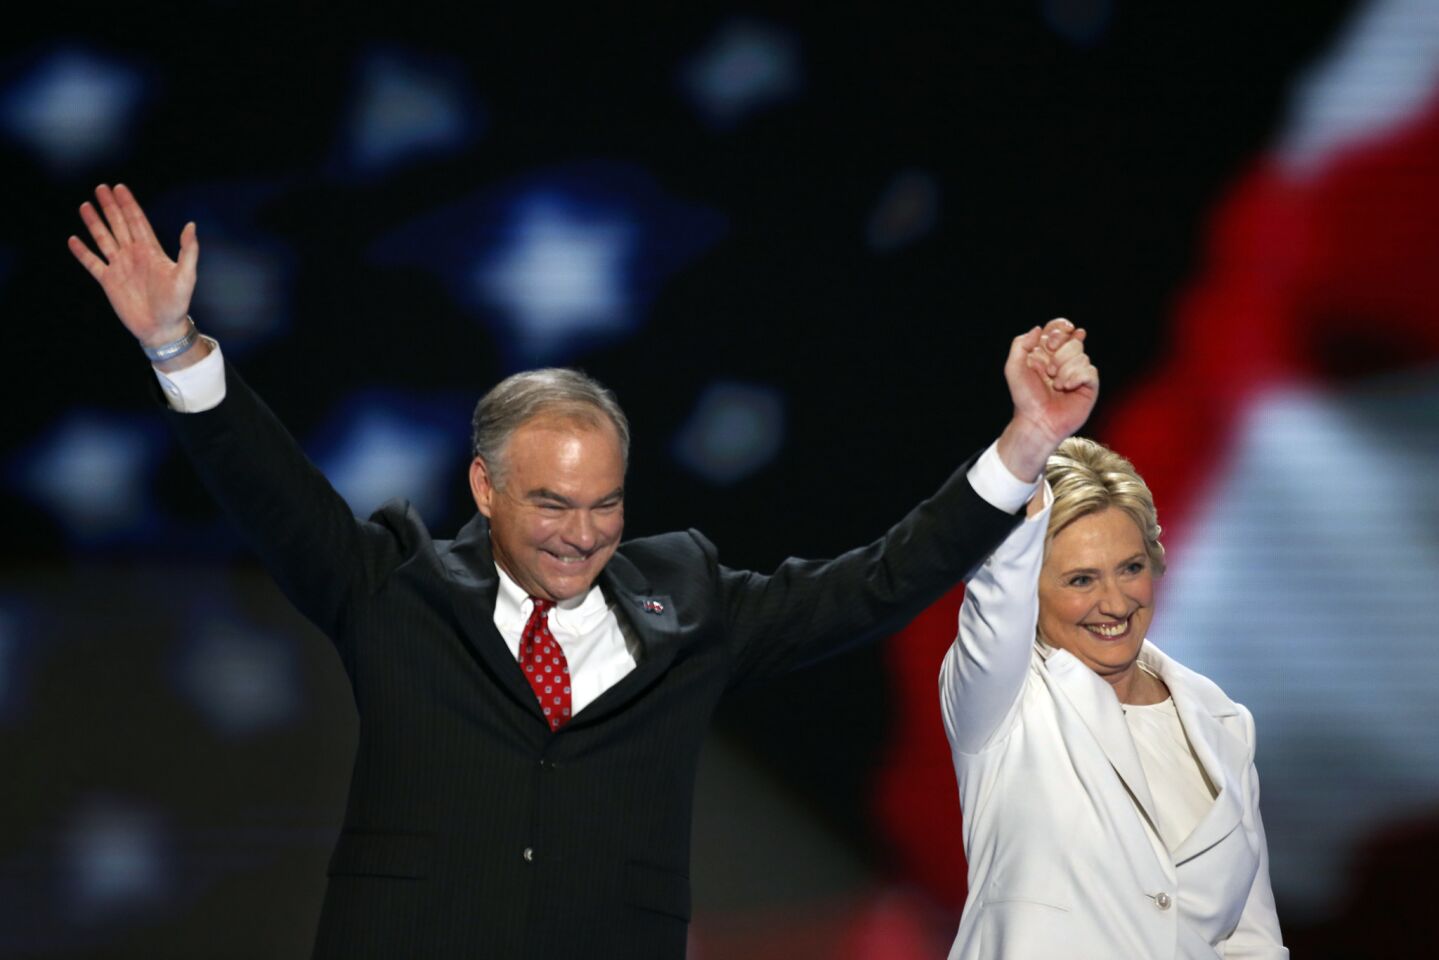 Hillary Clinton becomes the first woman to win the nomination for President in America. Celebration begins with Senator Tim Kaine after she finished her address.